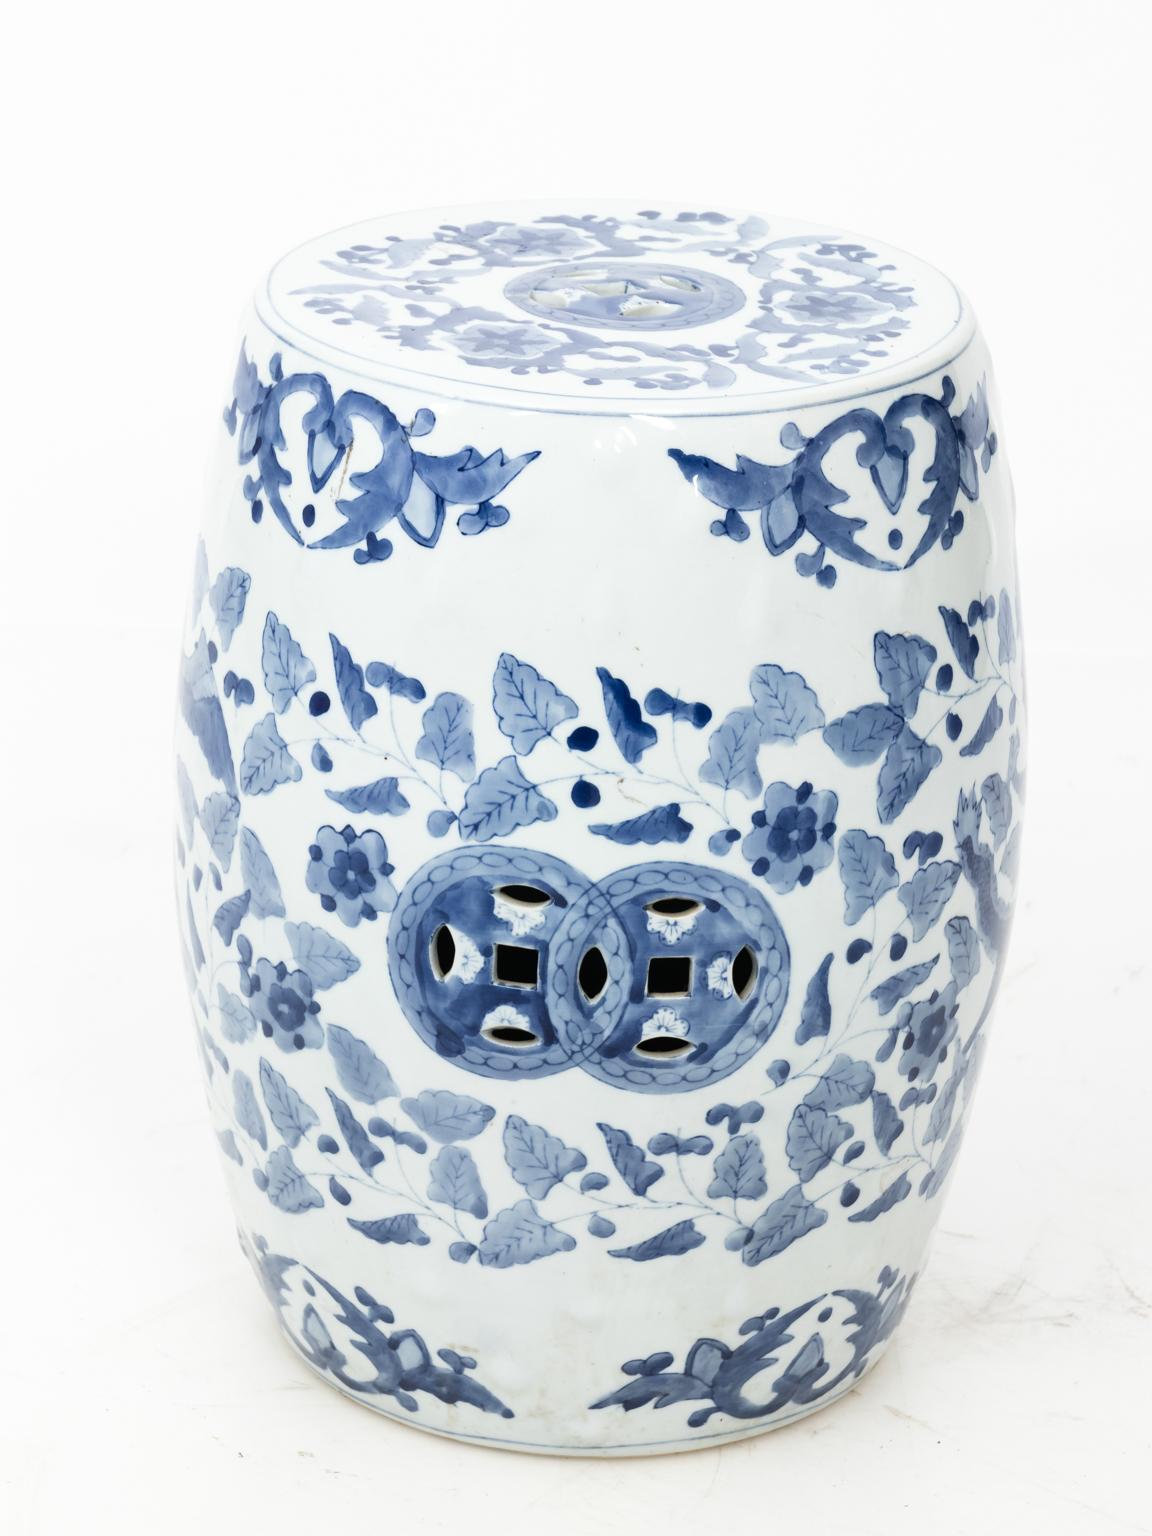 Chinese Export Blue and White Chinese Porcelain Garden Seat with Phoenix Motif